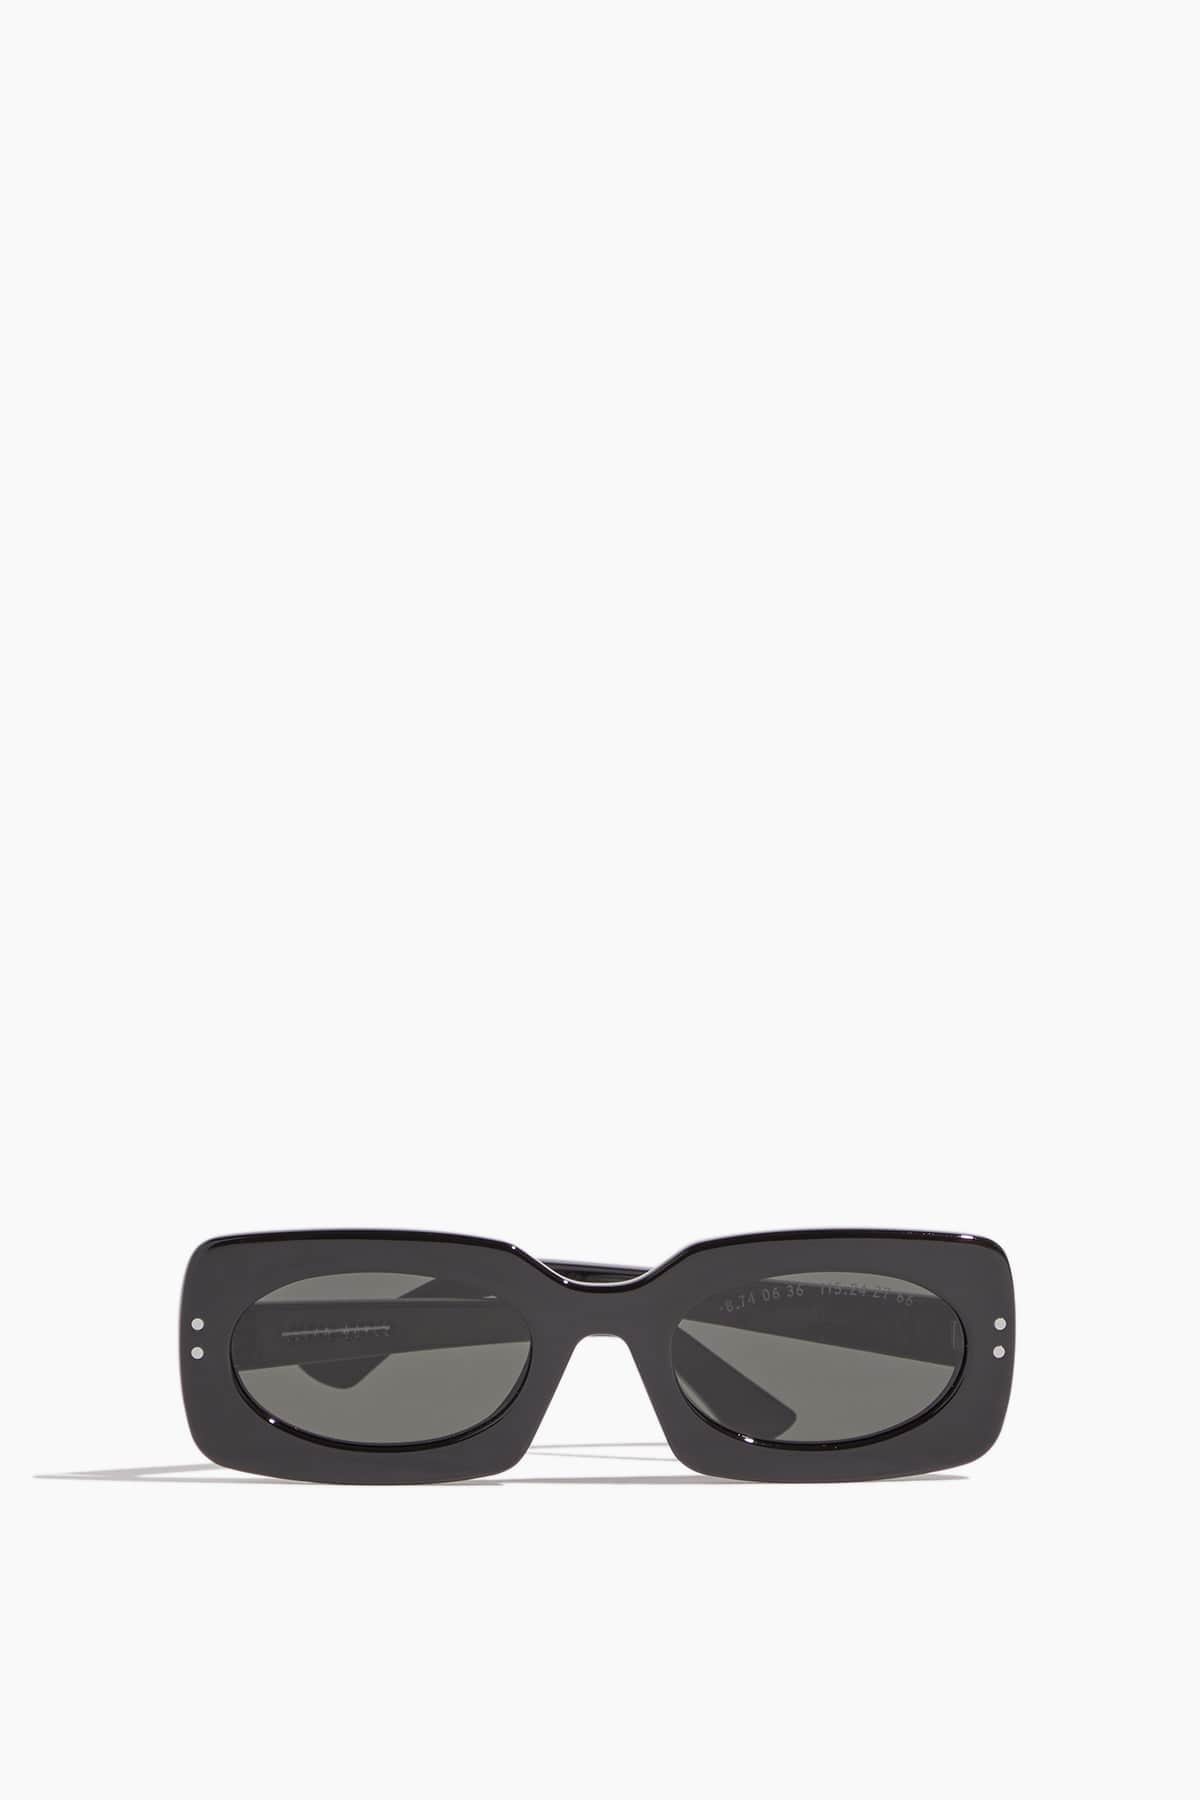 Clean Waves Sunglasses Inez and Vinoodh Rectangle Low Sunglasses in Black